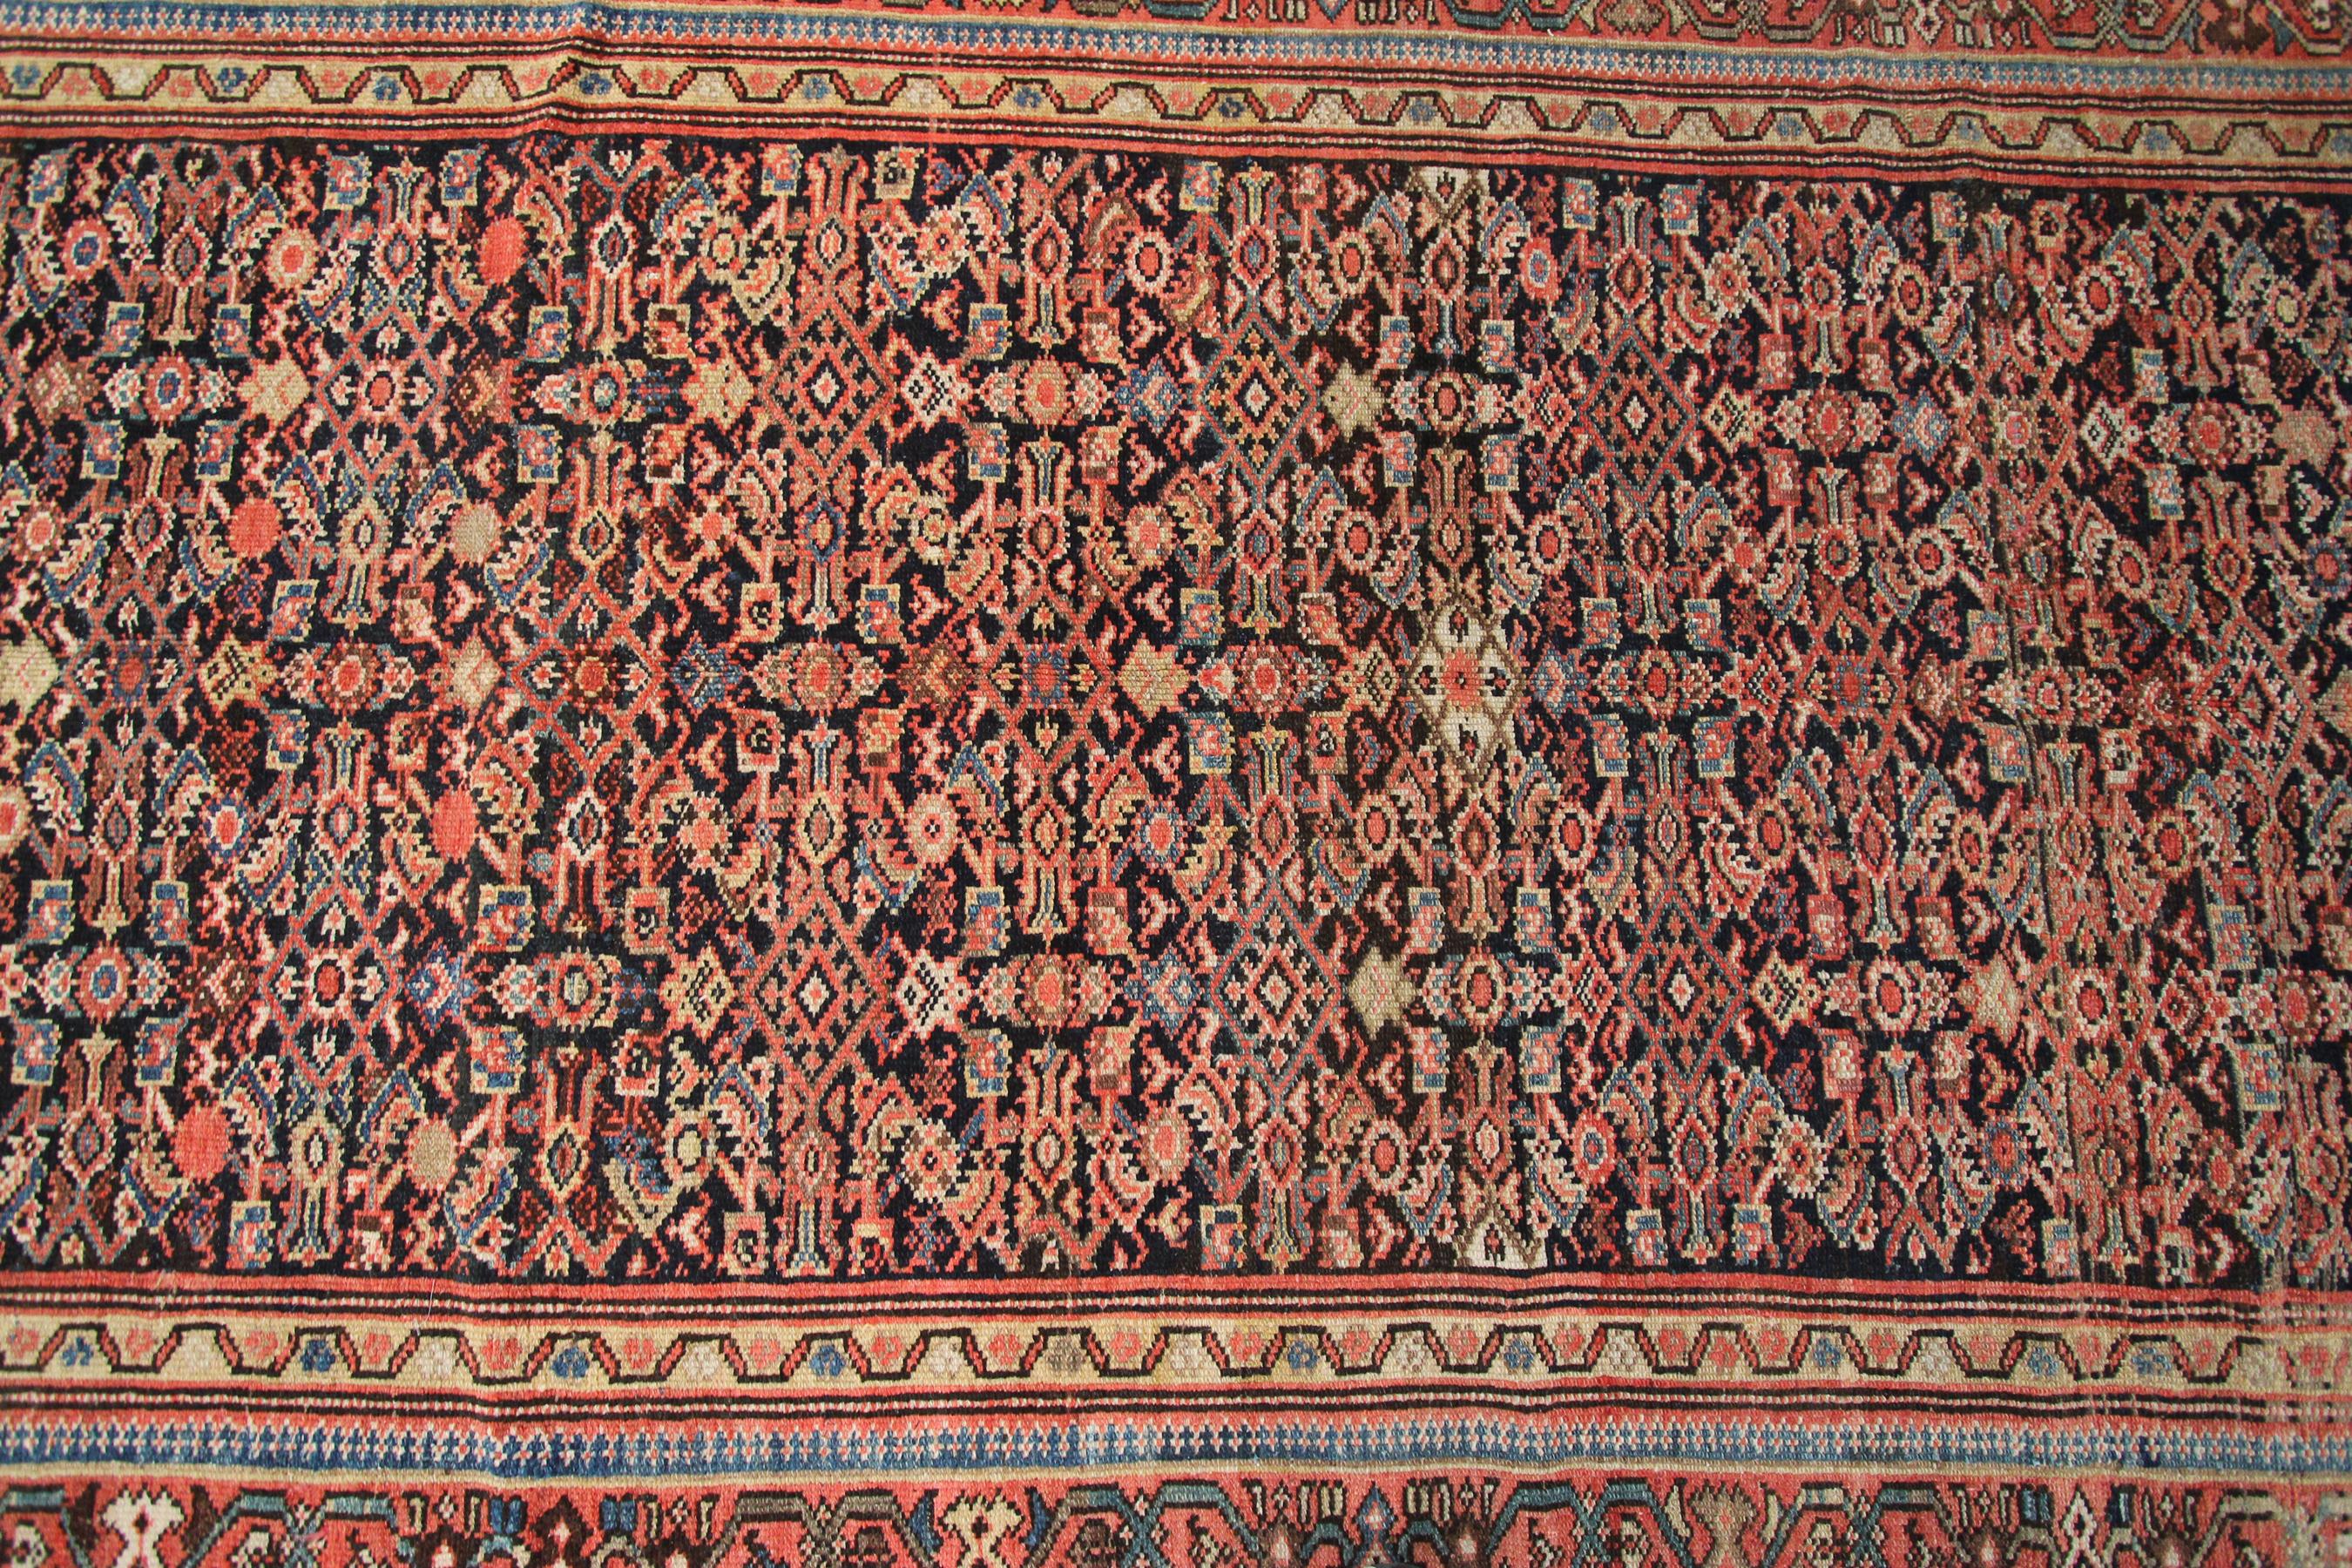 Hand-Knotted 1900 Antique Persian Farahan Rug Antique Farahan Rug Geometric Overall For Sale